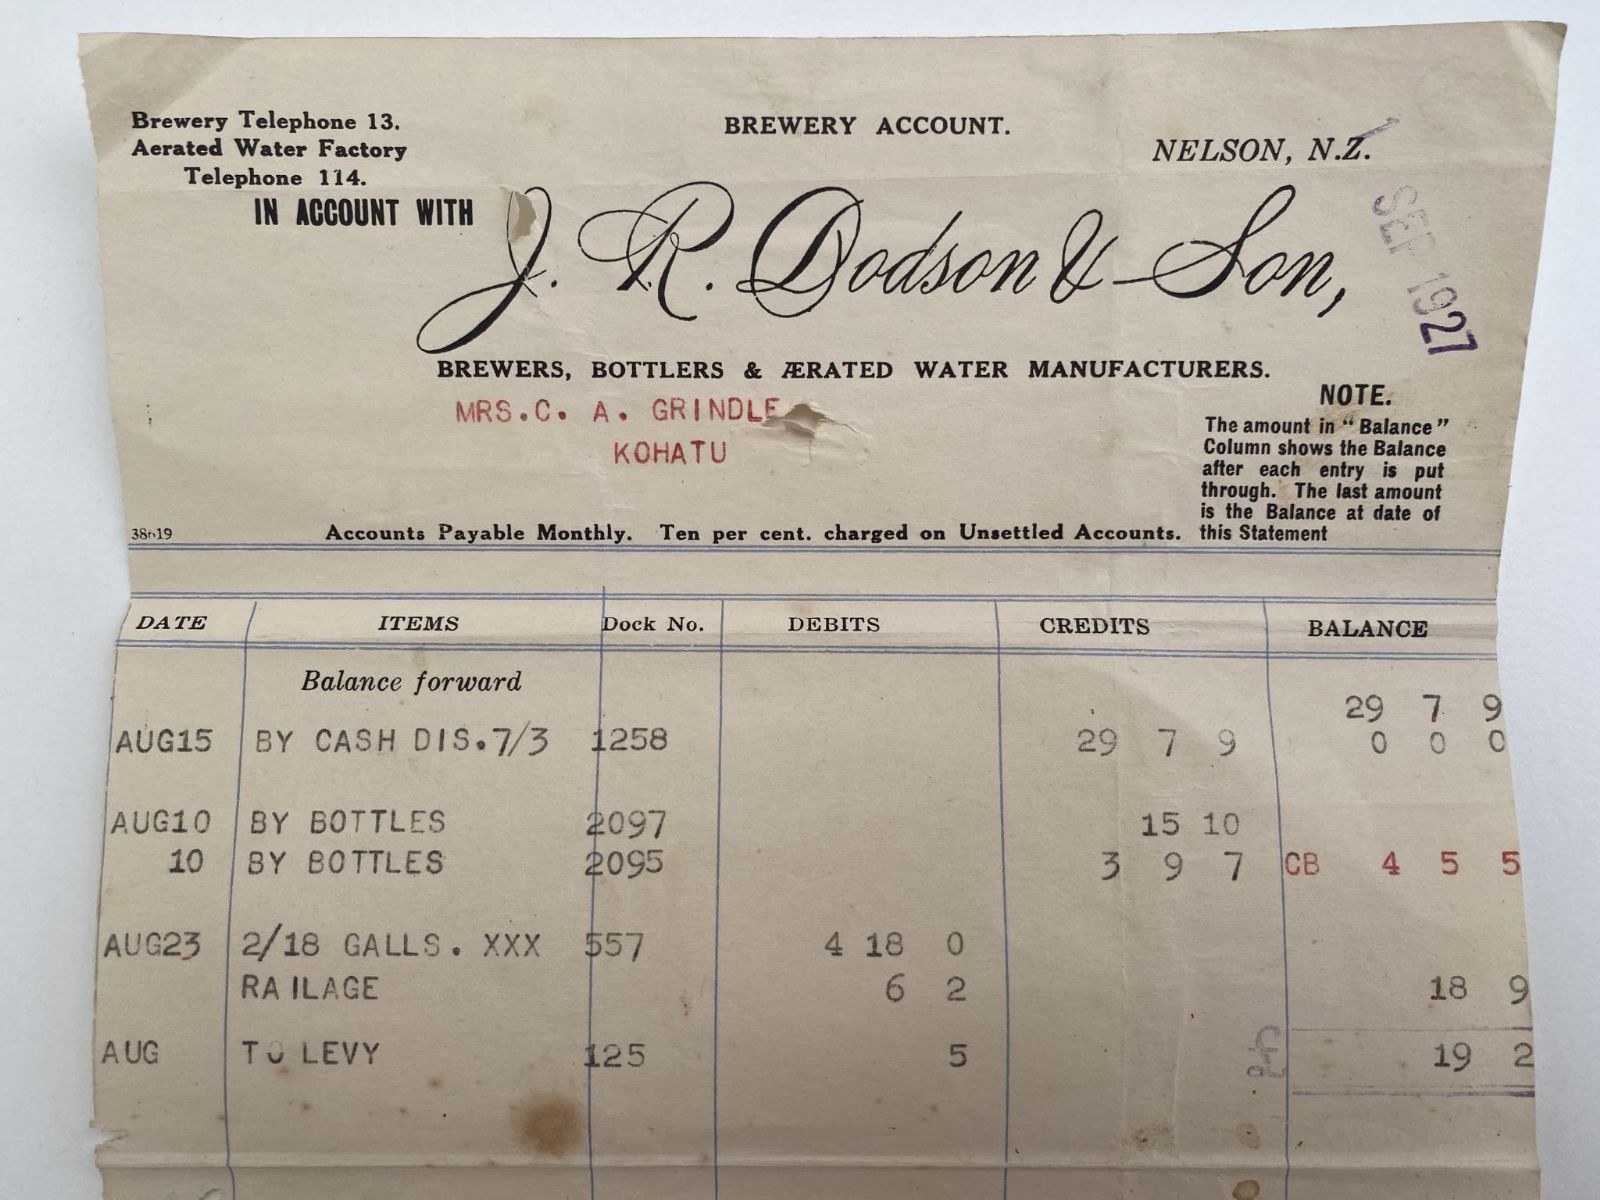 OLD INVOICE / RECEIPT: J. R Dodson & Son - Brewers & Bottlers, Nelson 1927